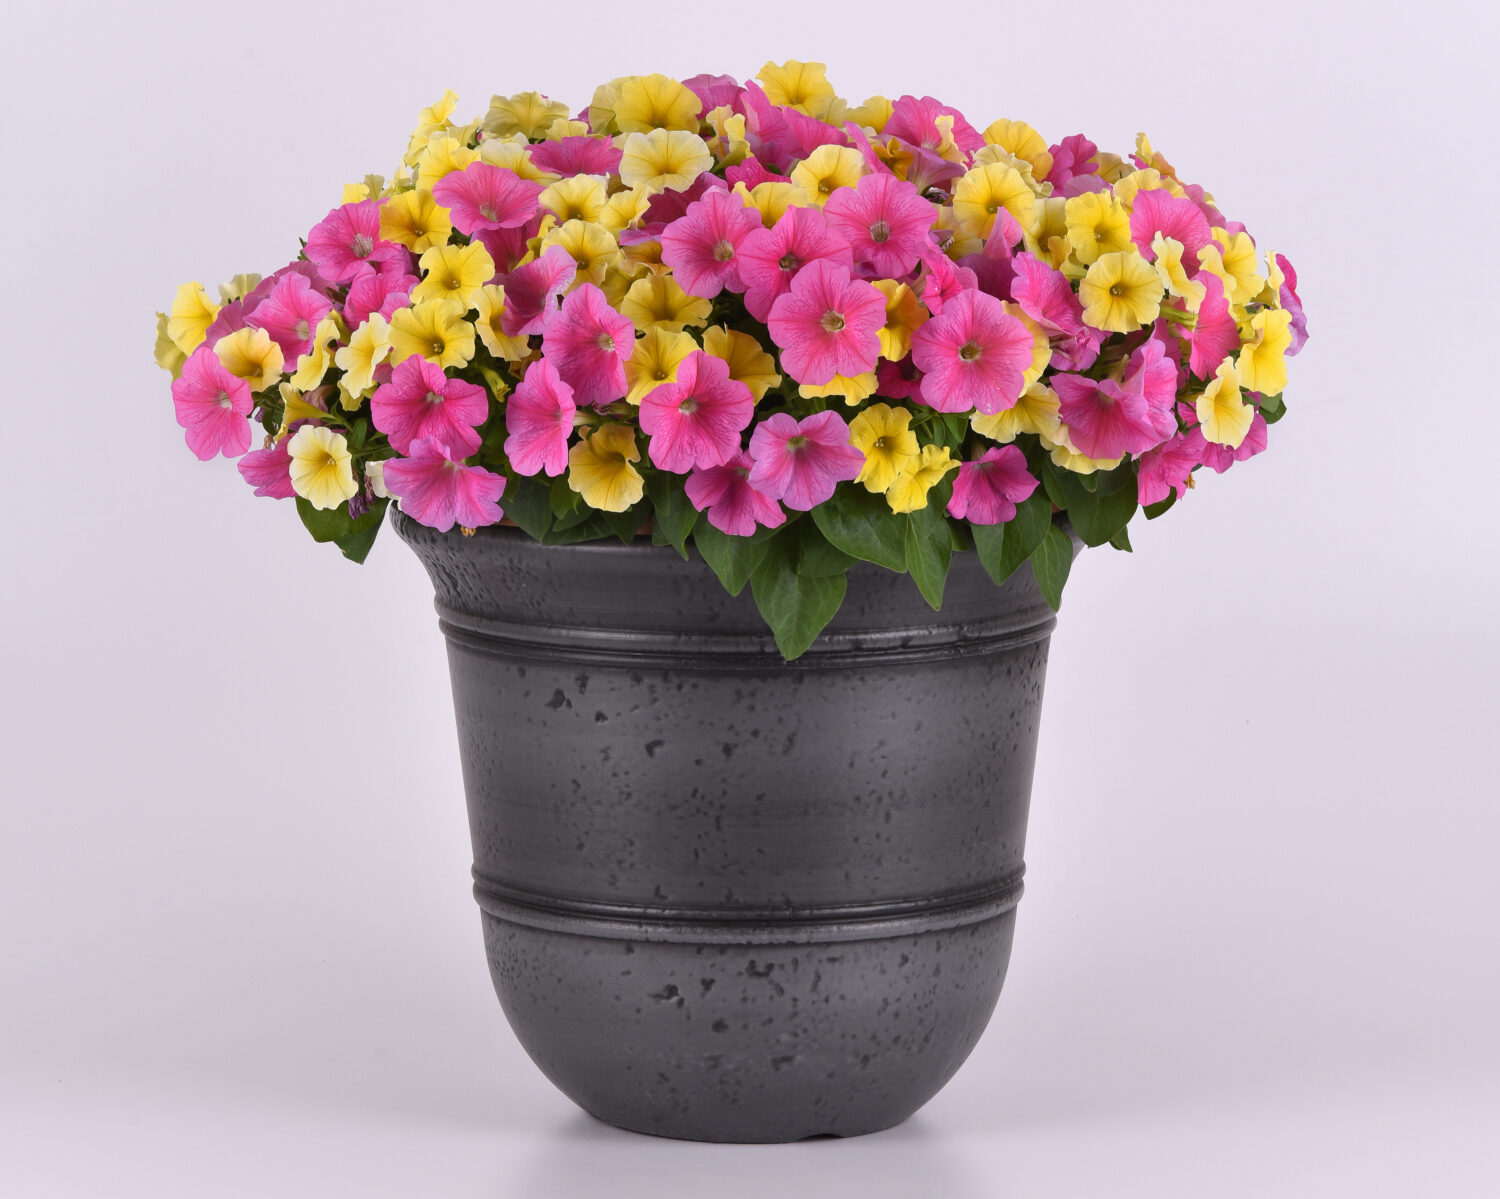 Paired together, petchoa ‘Caliburst Yellow’ and petunia ‘E3 Easy Wave Pink Cosmo’ make a great early-spring mix.